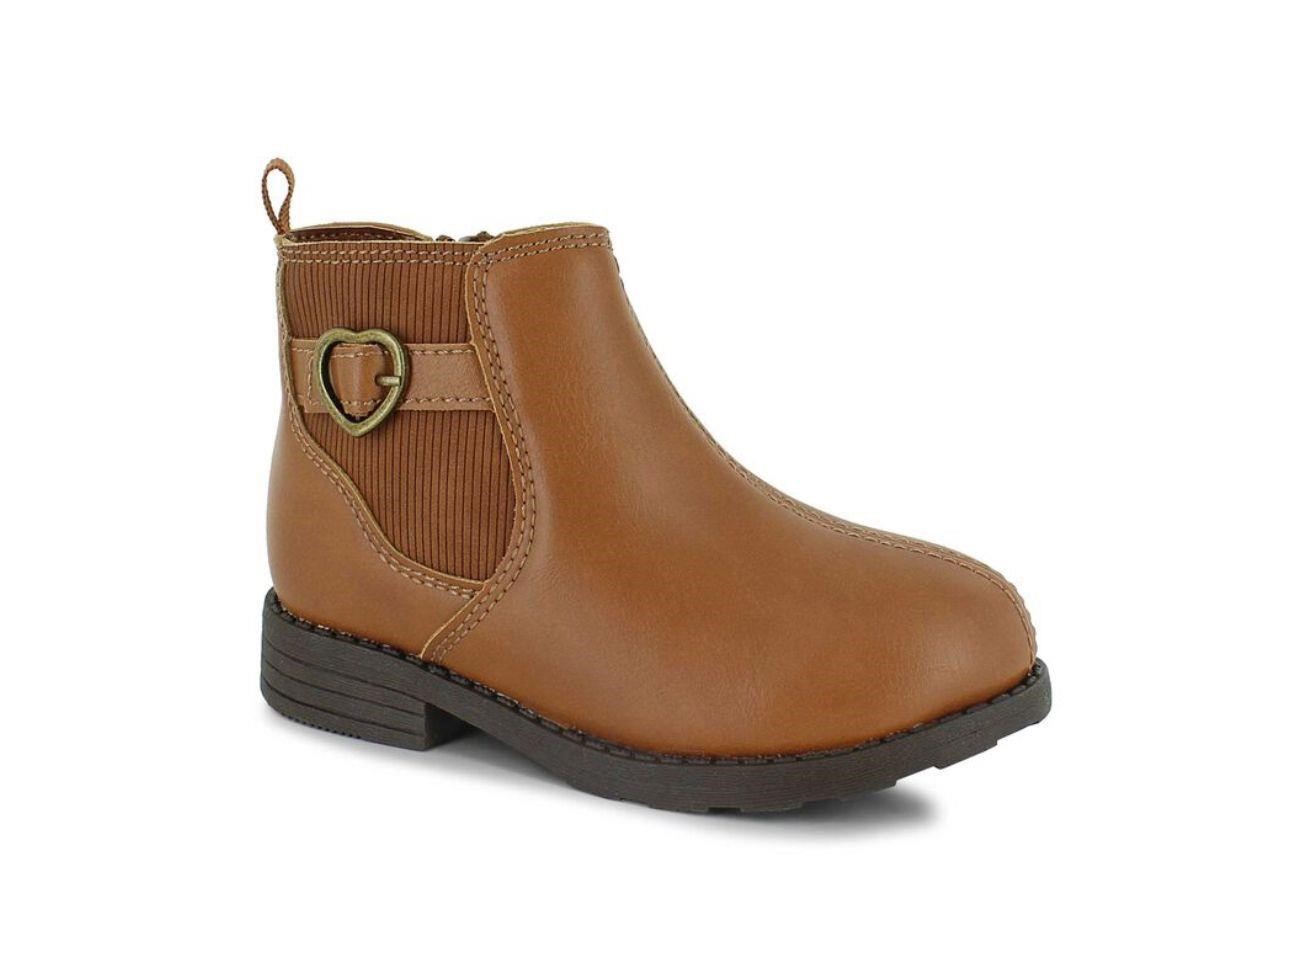 TODDLER Carter's brown boots 12M $33